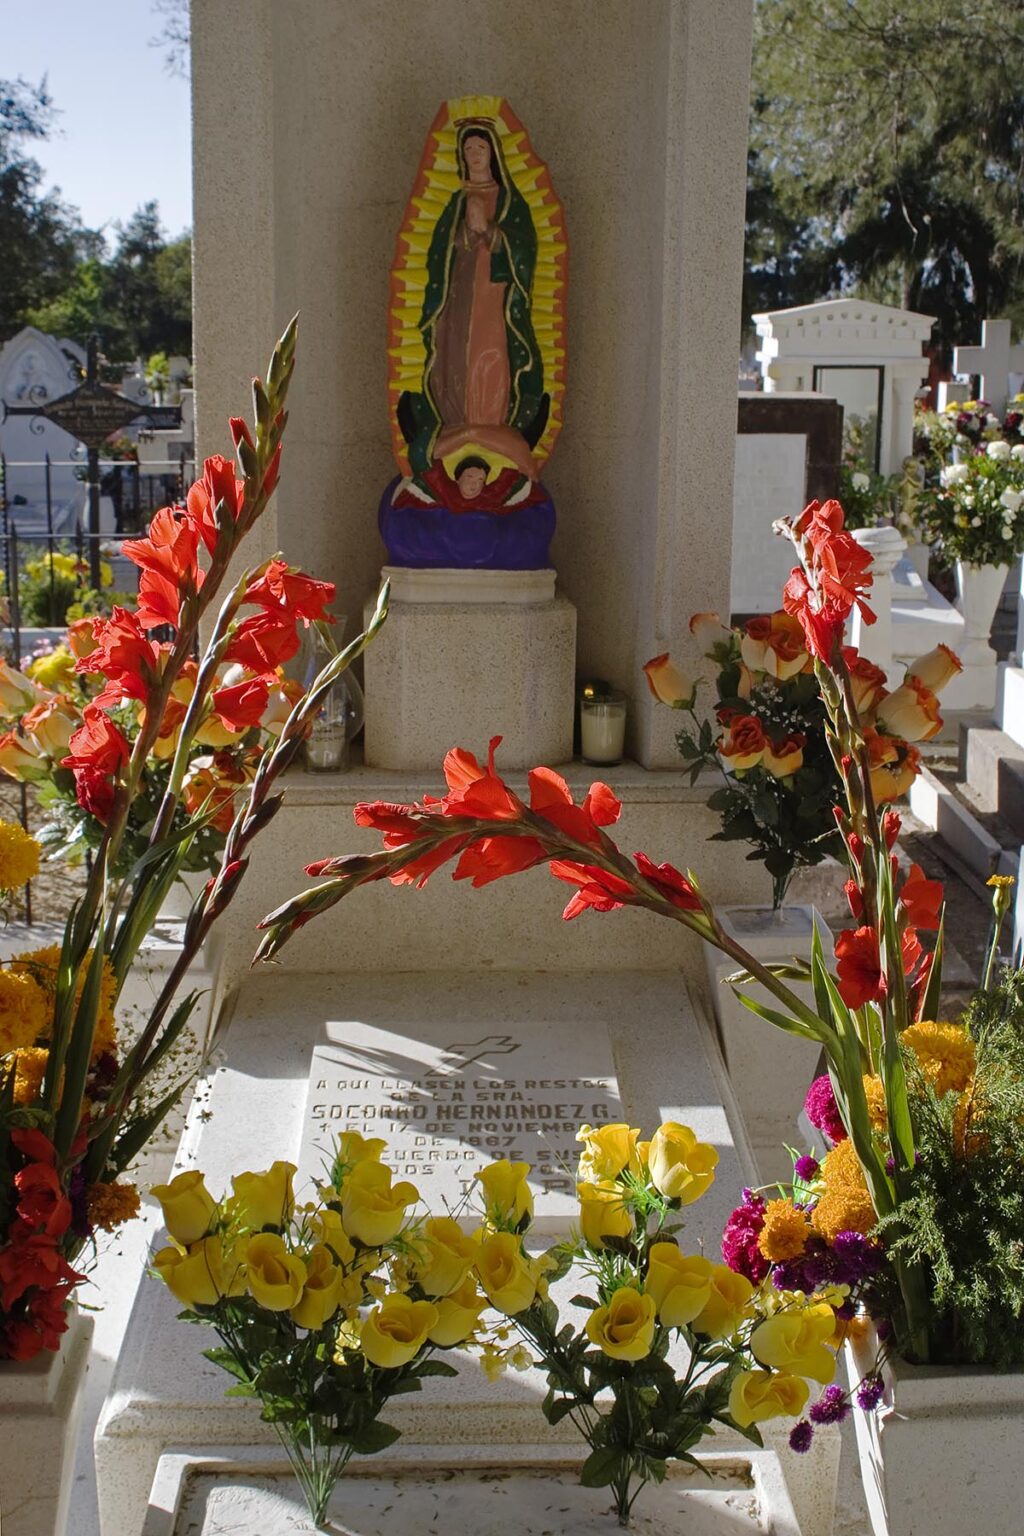 A FLOWER COVERED GRAVE at the local cemetery during the DEAD OF THE DEAD - SAN MIGUEL DE ALLENDE, MEXICO